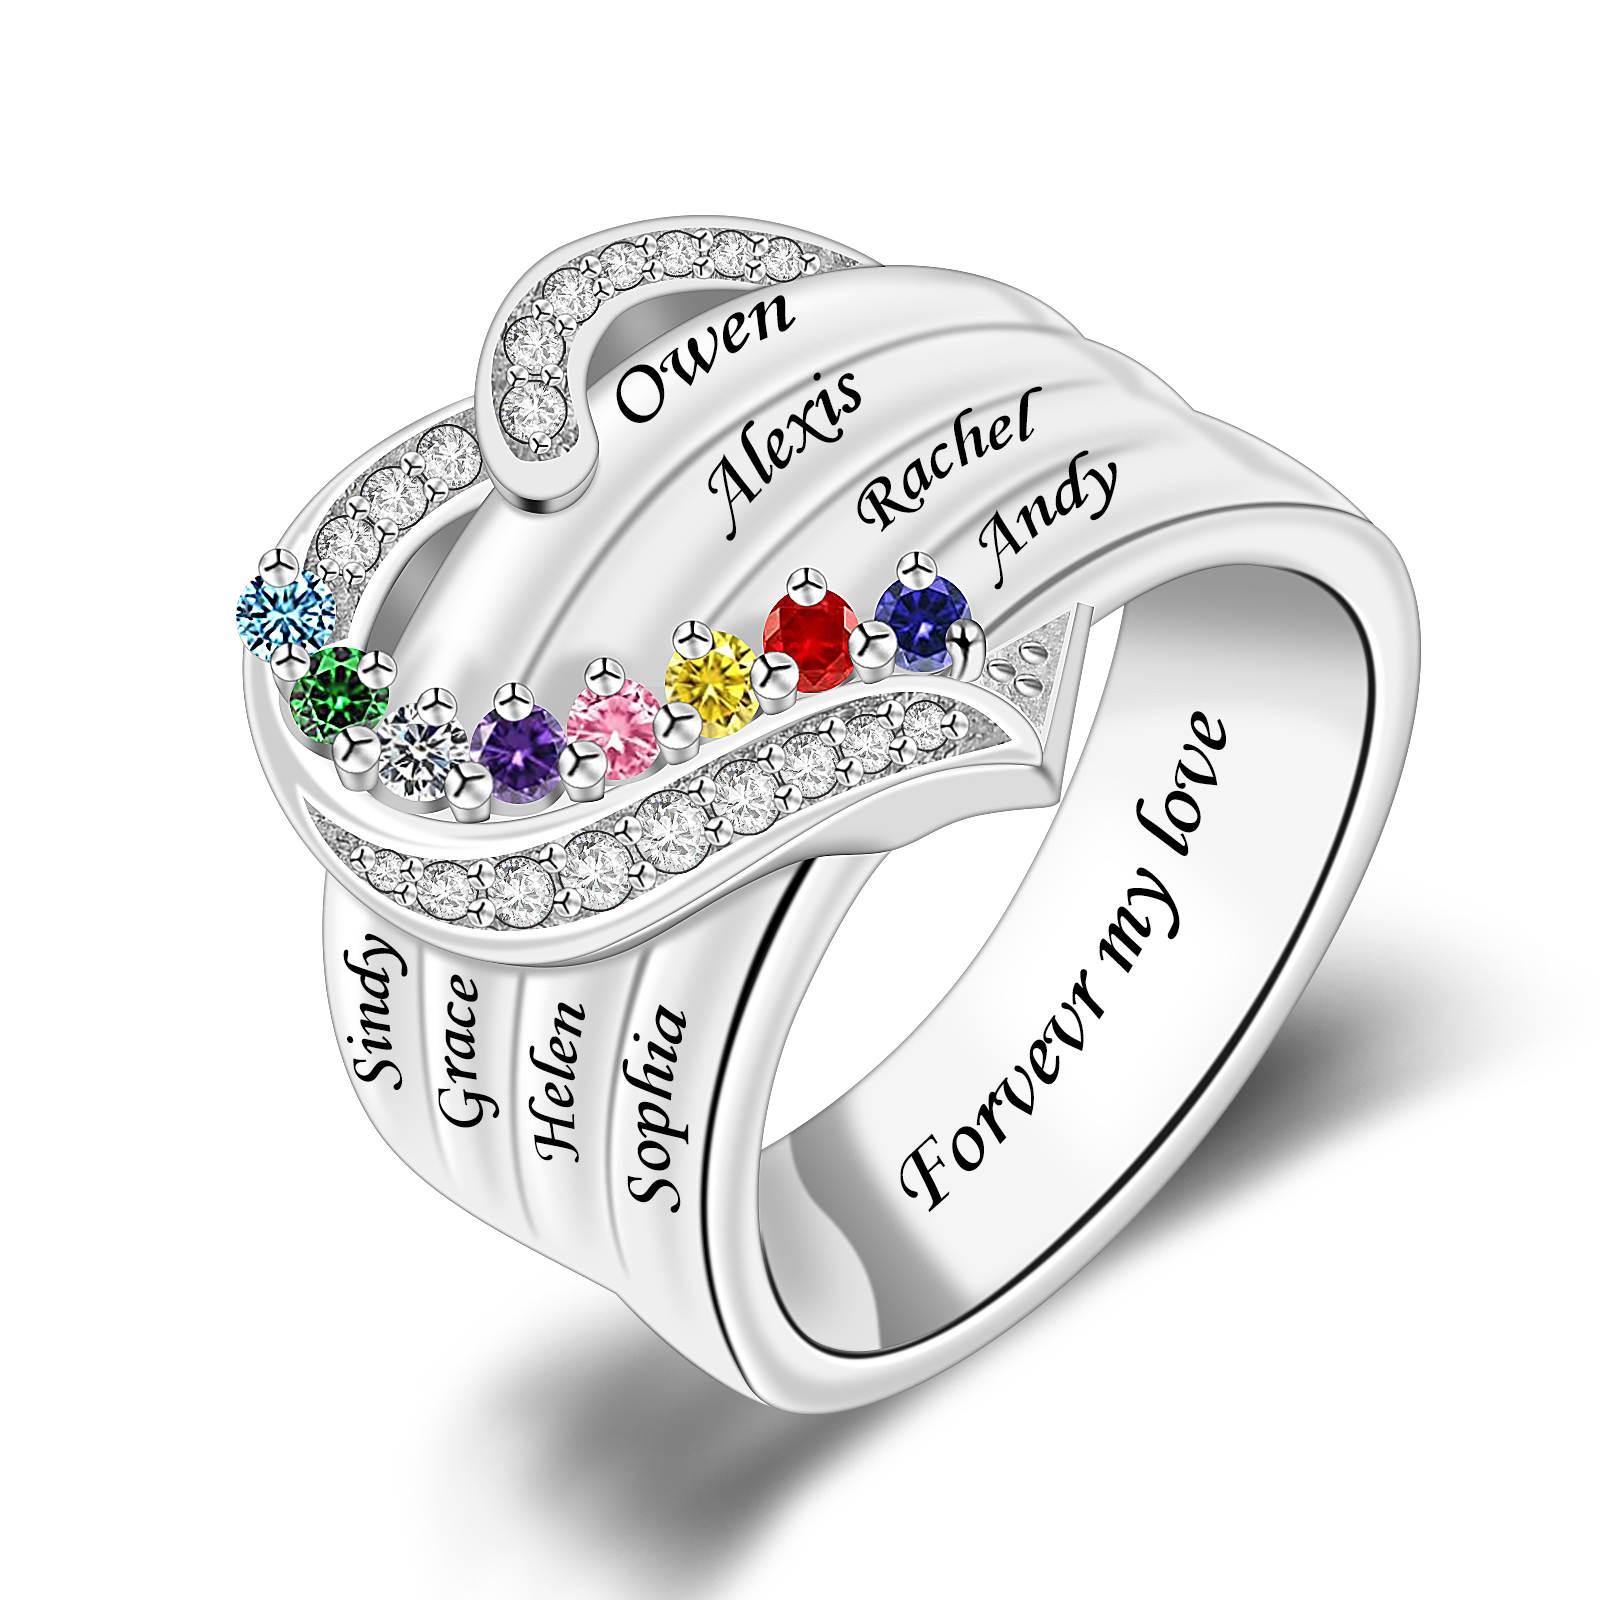 R6-1-8 Heart Mother Ring with Engraved Names and Simulated Birthstone